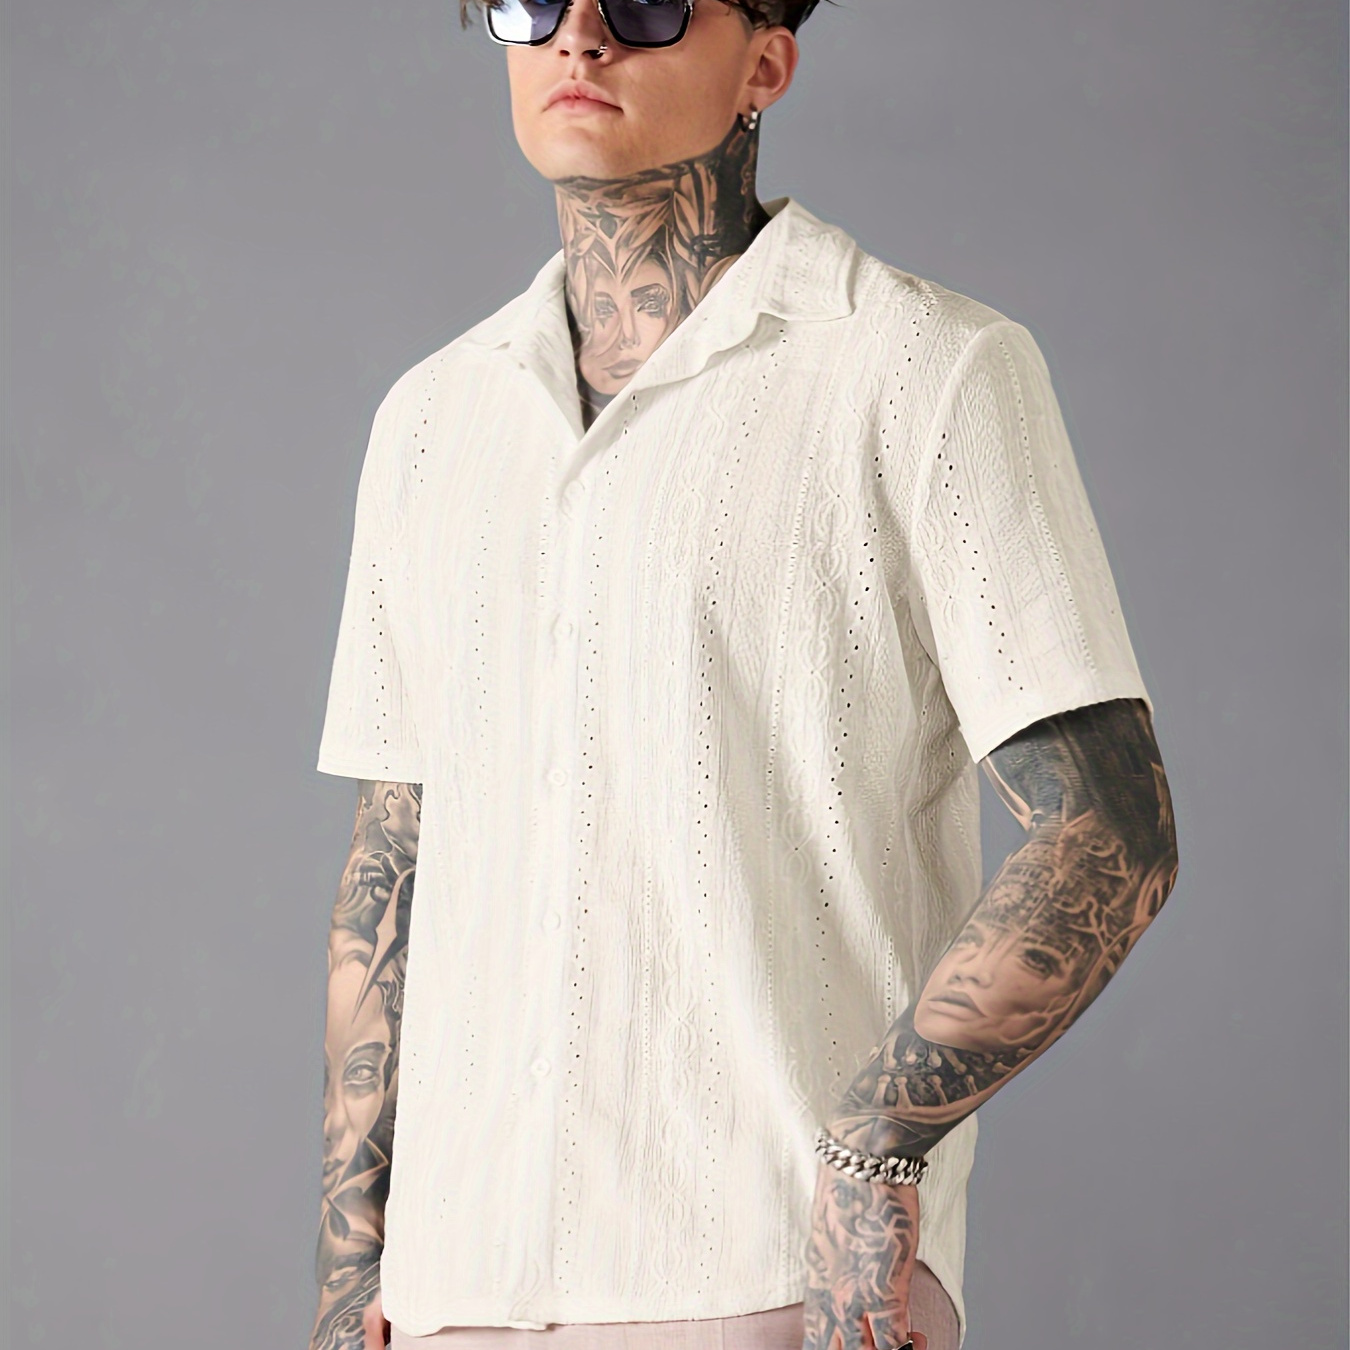 

Men's Solid Color Lapel Shirt With Novel Designed Hollow Pattern, Short Sleeve And Button Down Placket, Casual And Novel Tops For Summer Leisurewear